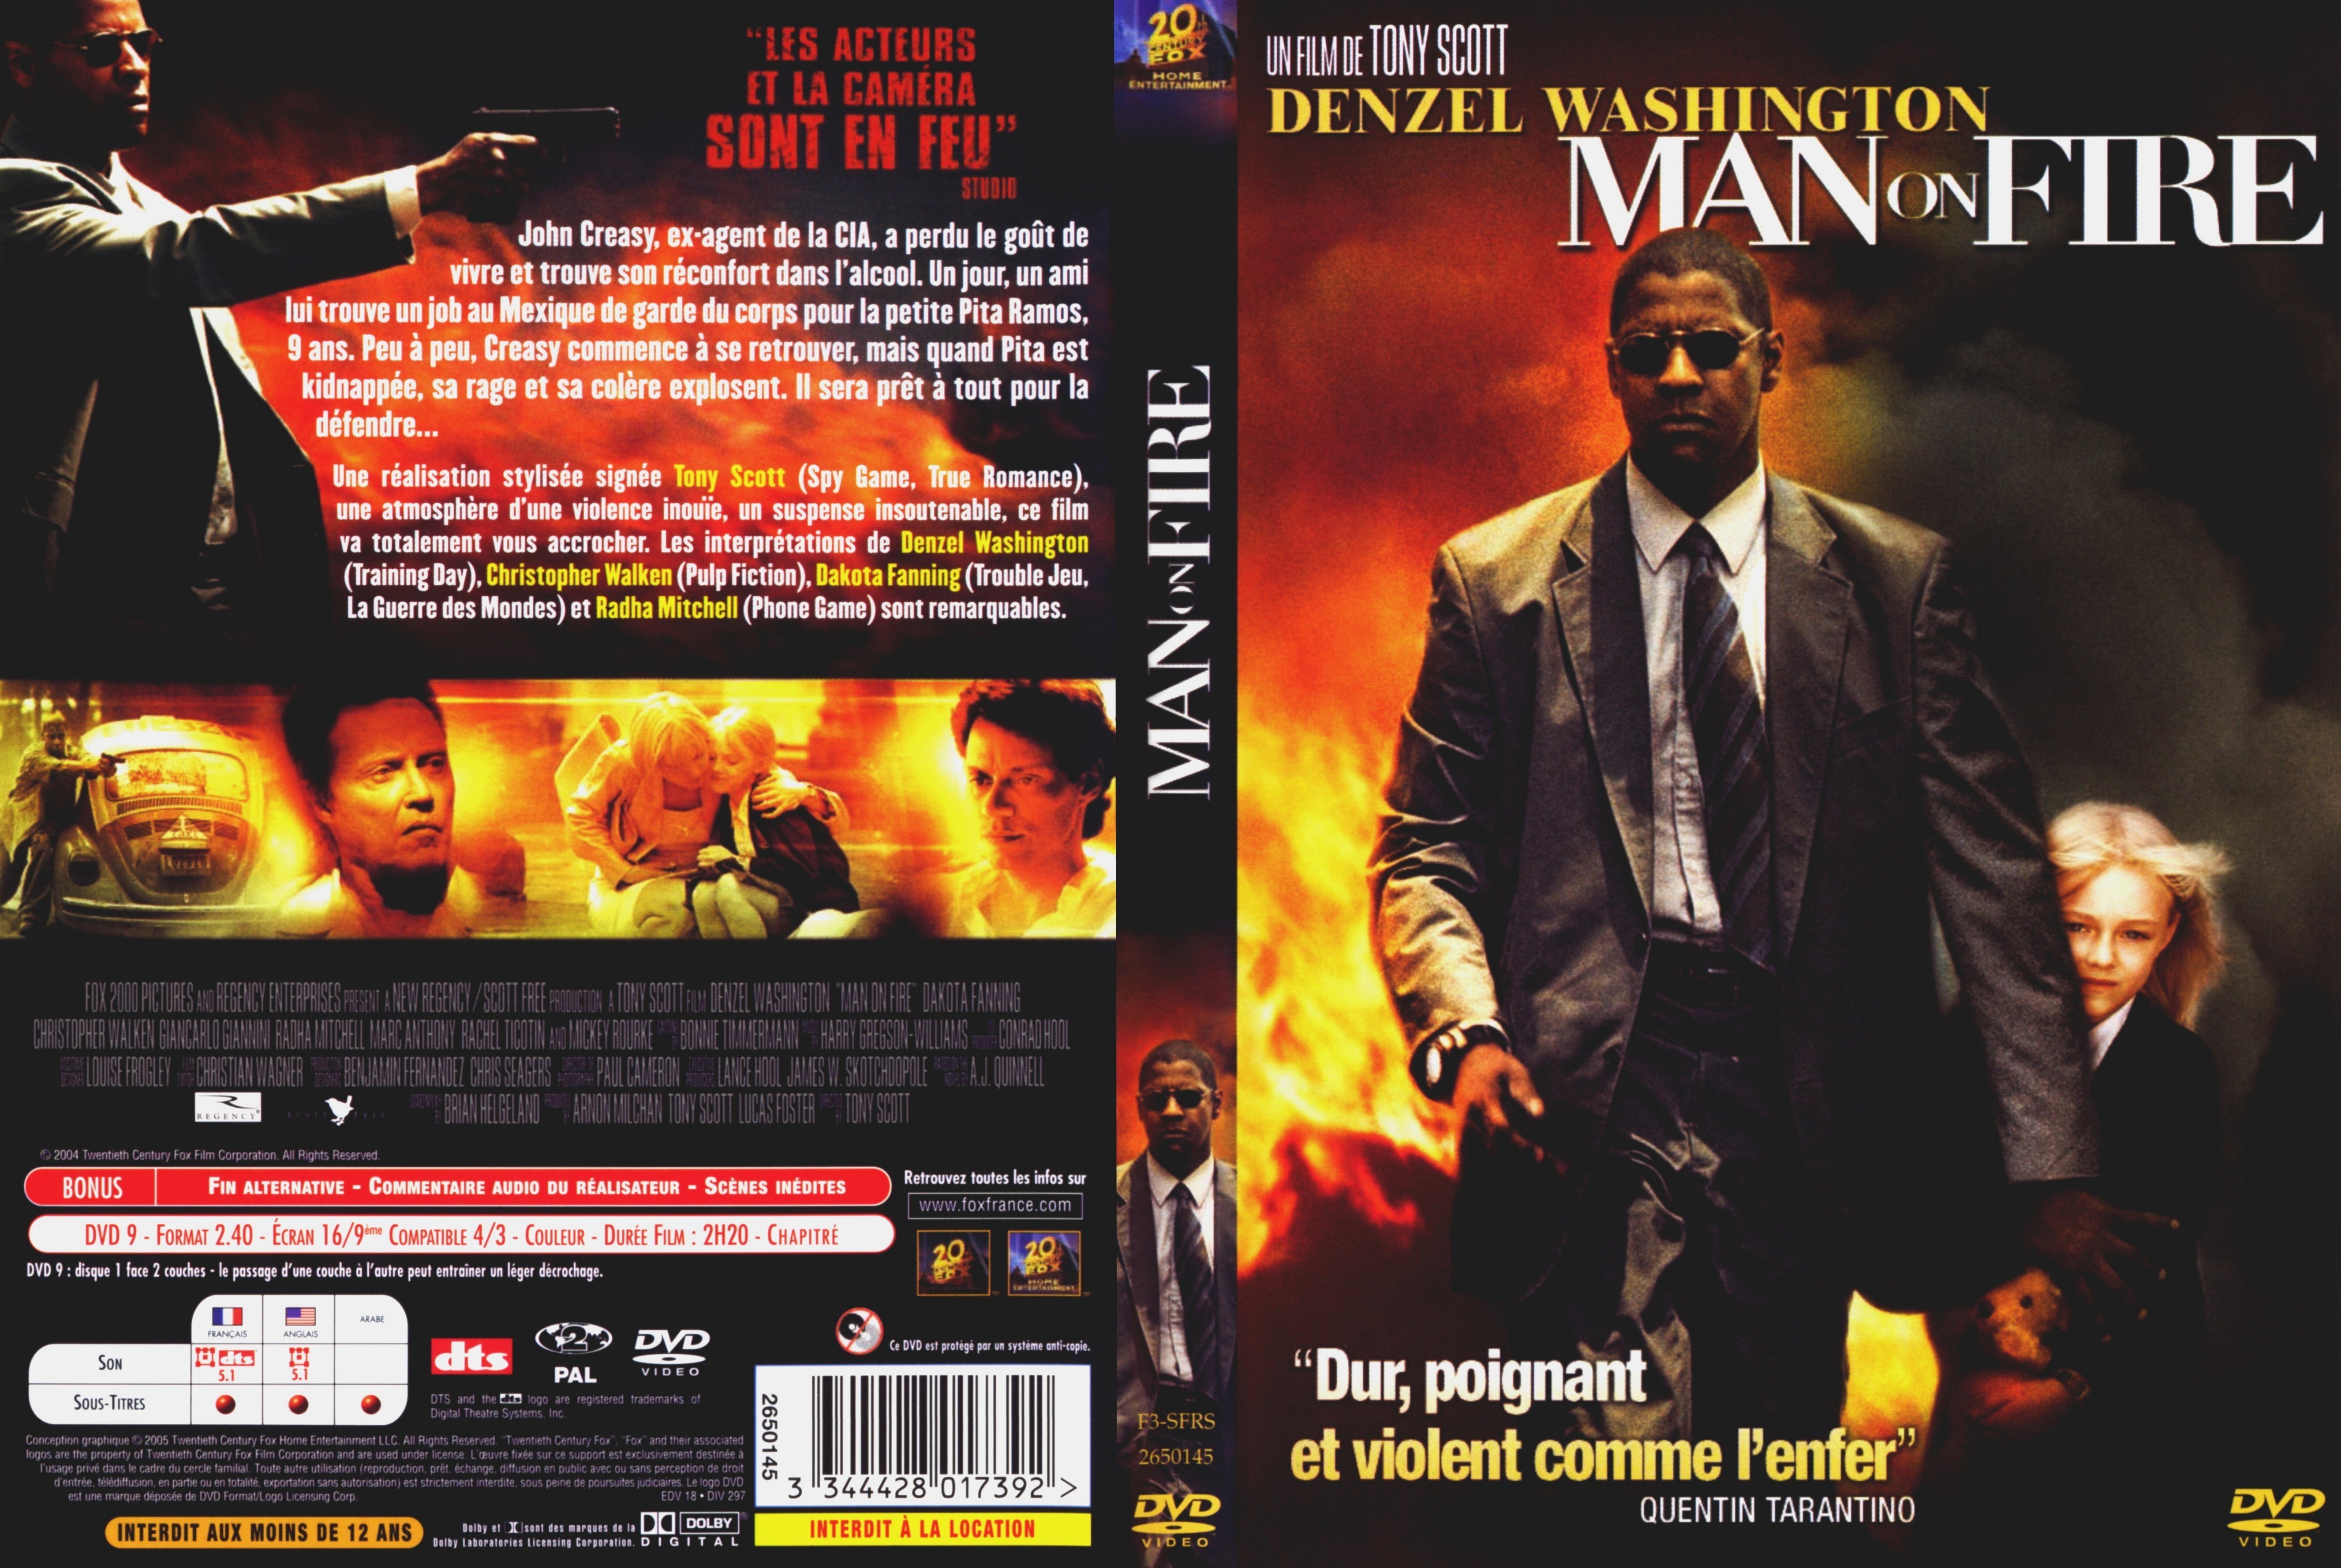 Jaquette DVD Man on fire